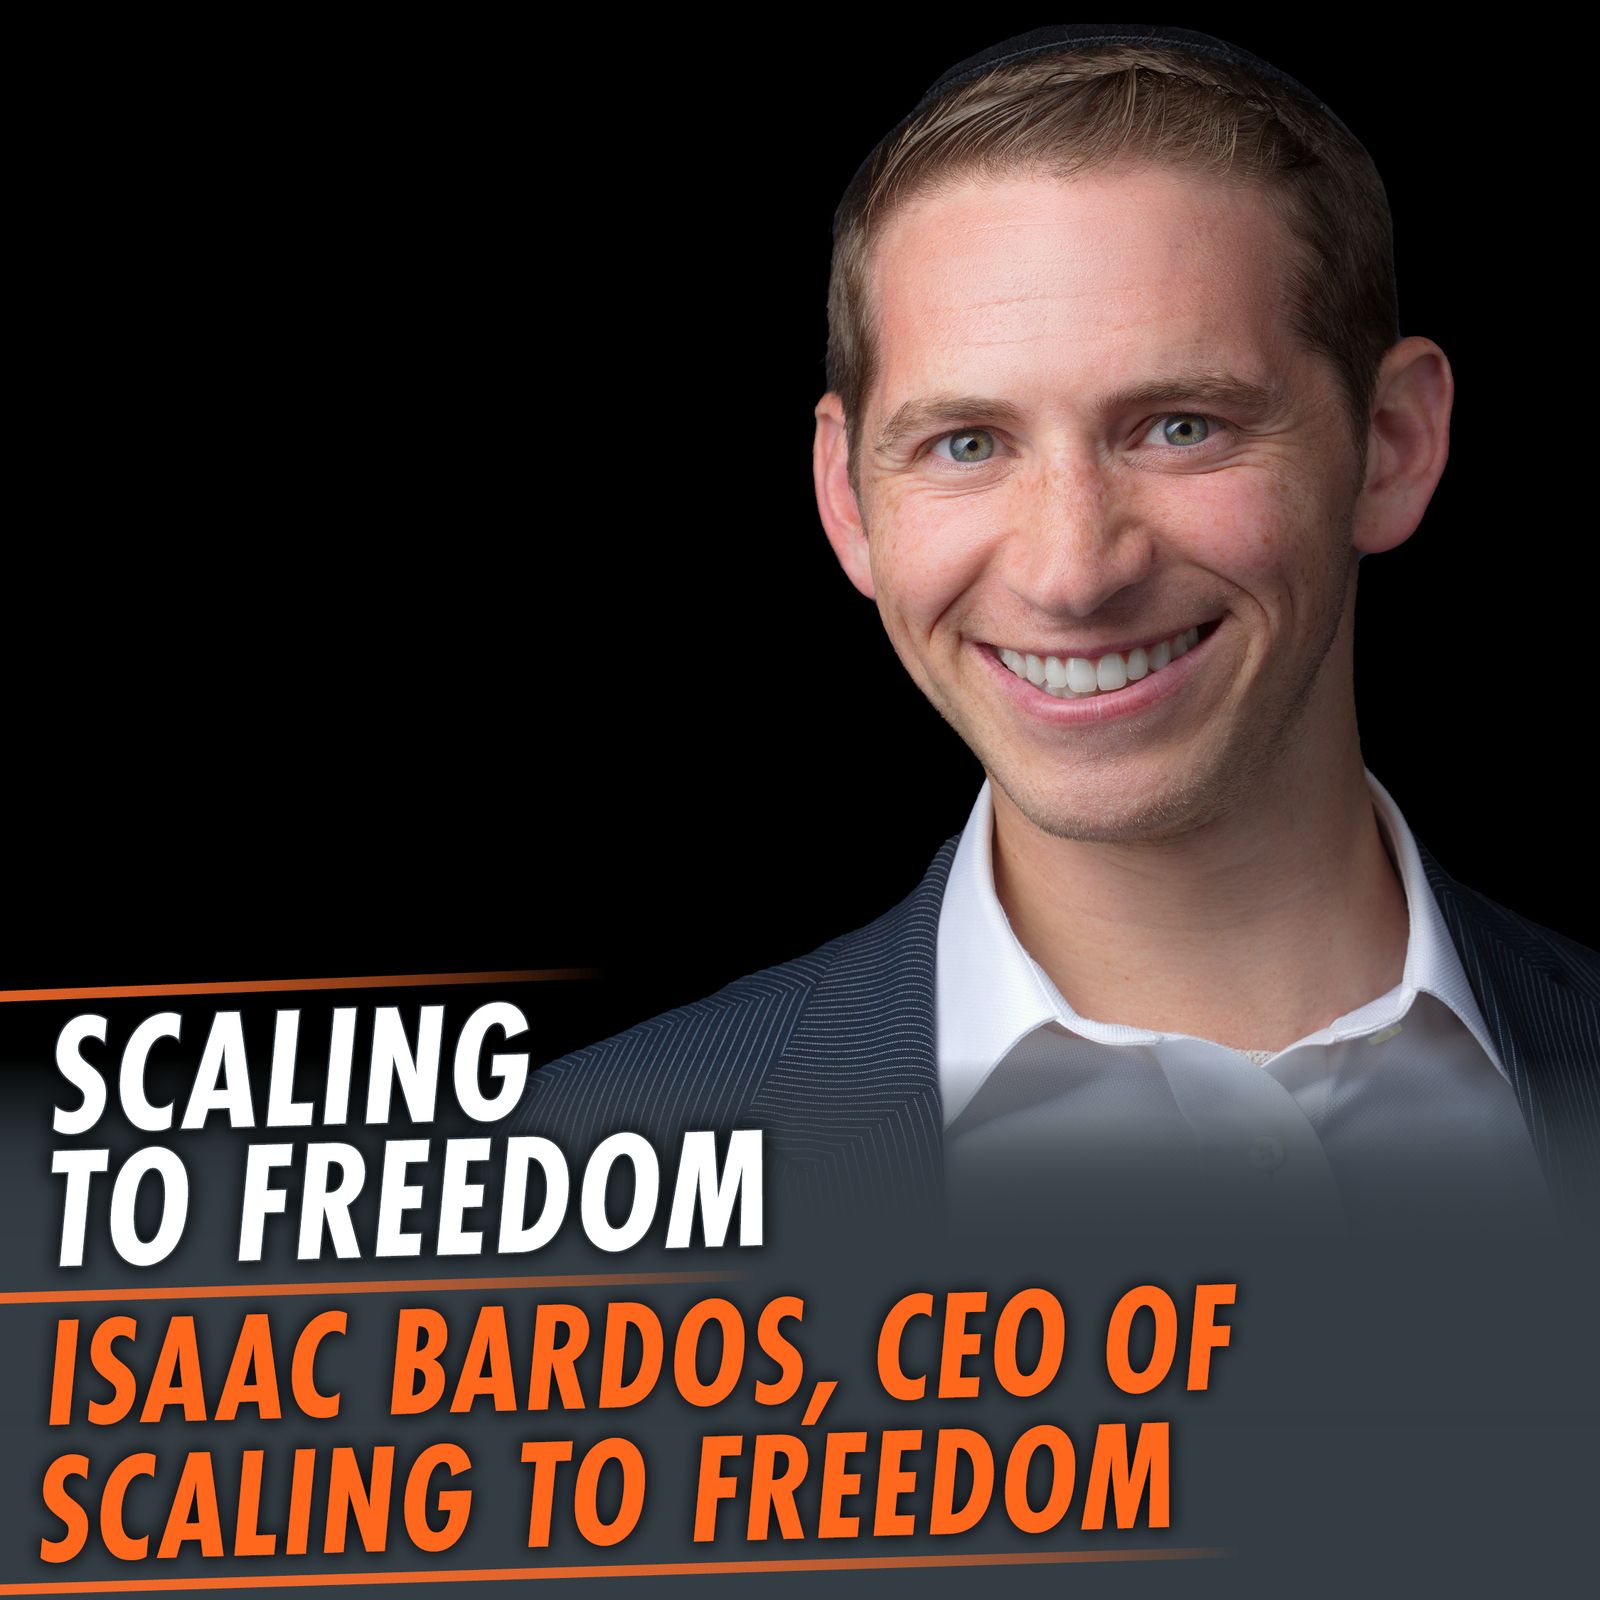 352: Scaling To Freedom featuring Isaac Bardos, CEO Of Scaling To Freedom